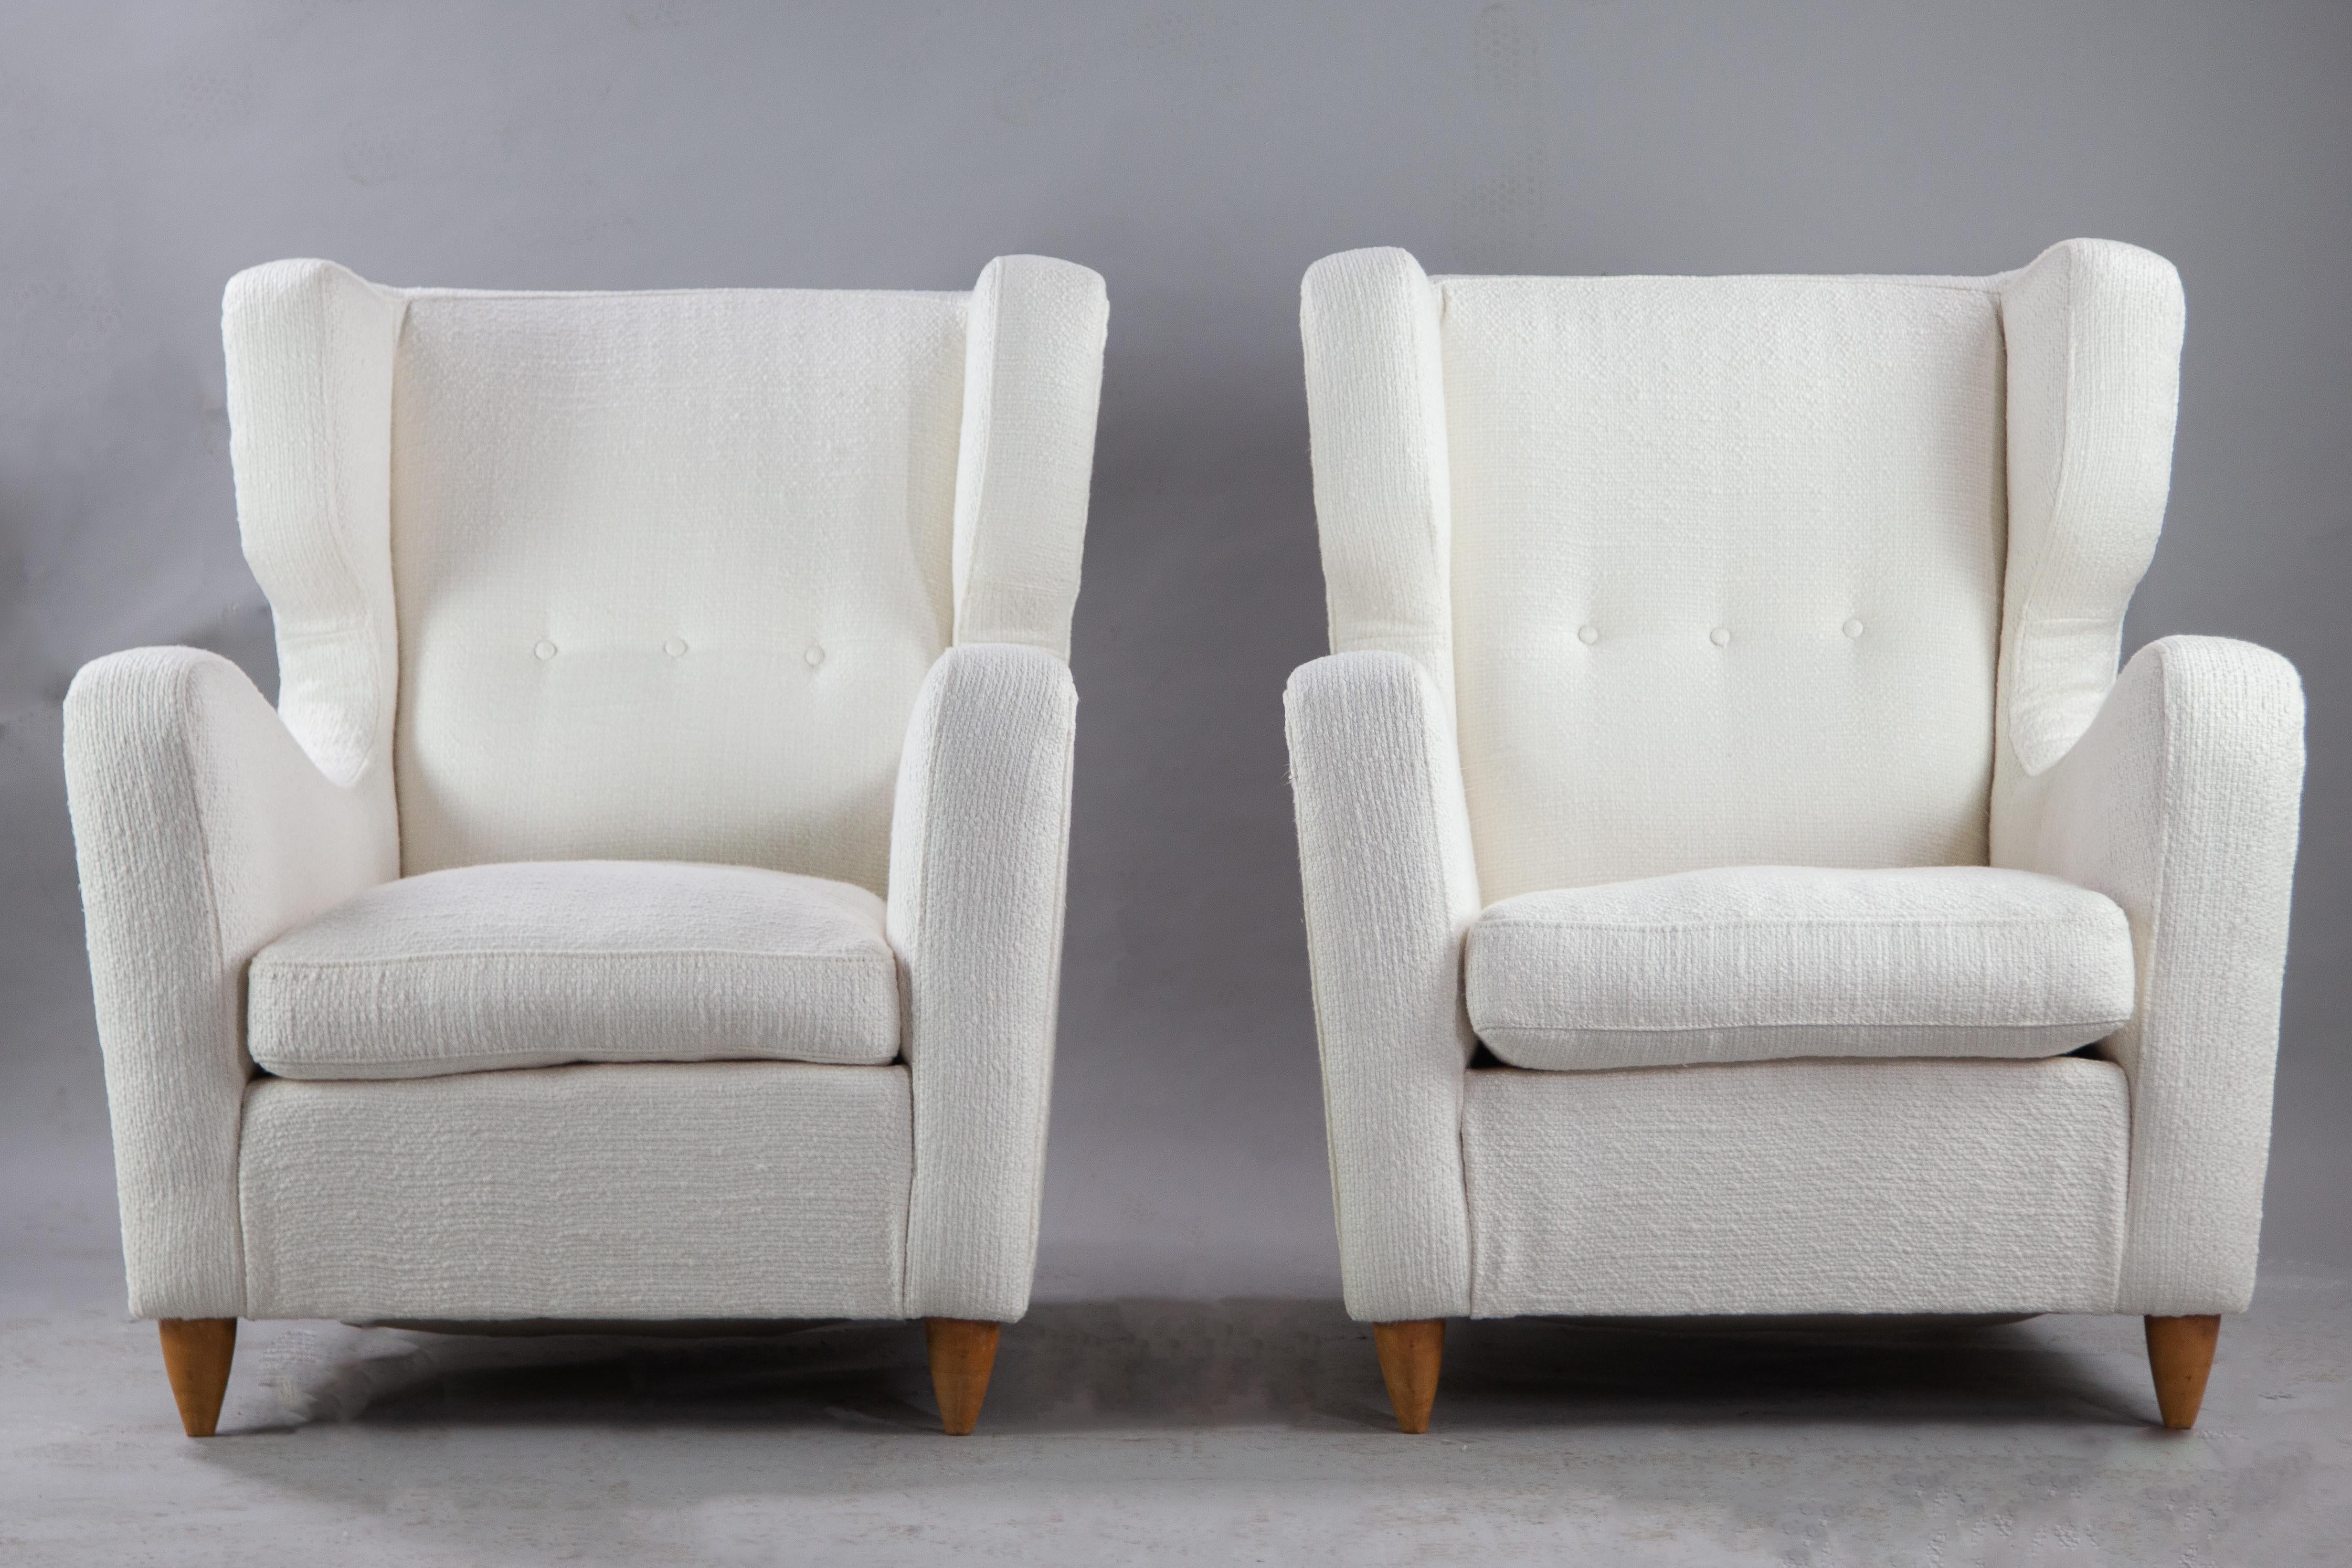 Wingback Chairs by Melchiorre Bega 1940s, Reupholstered in Metaphore Fabric For Sale 1